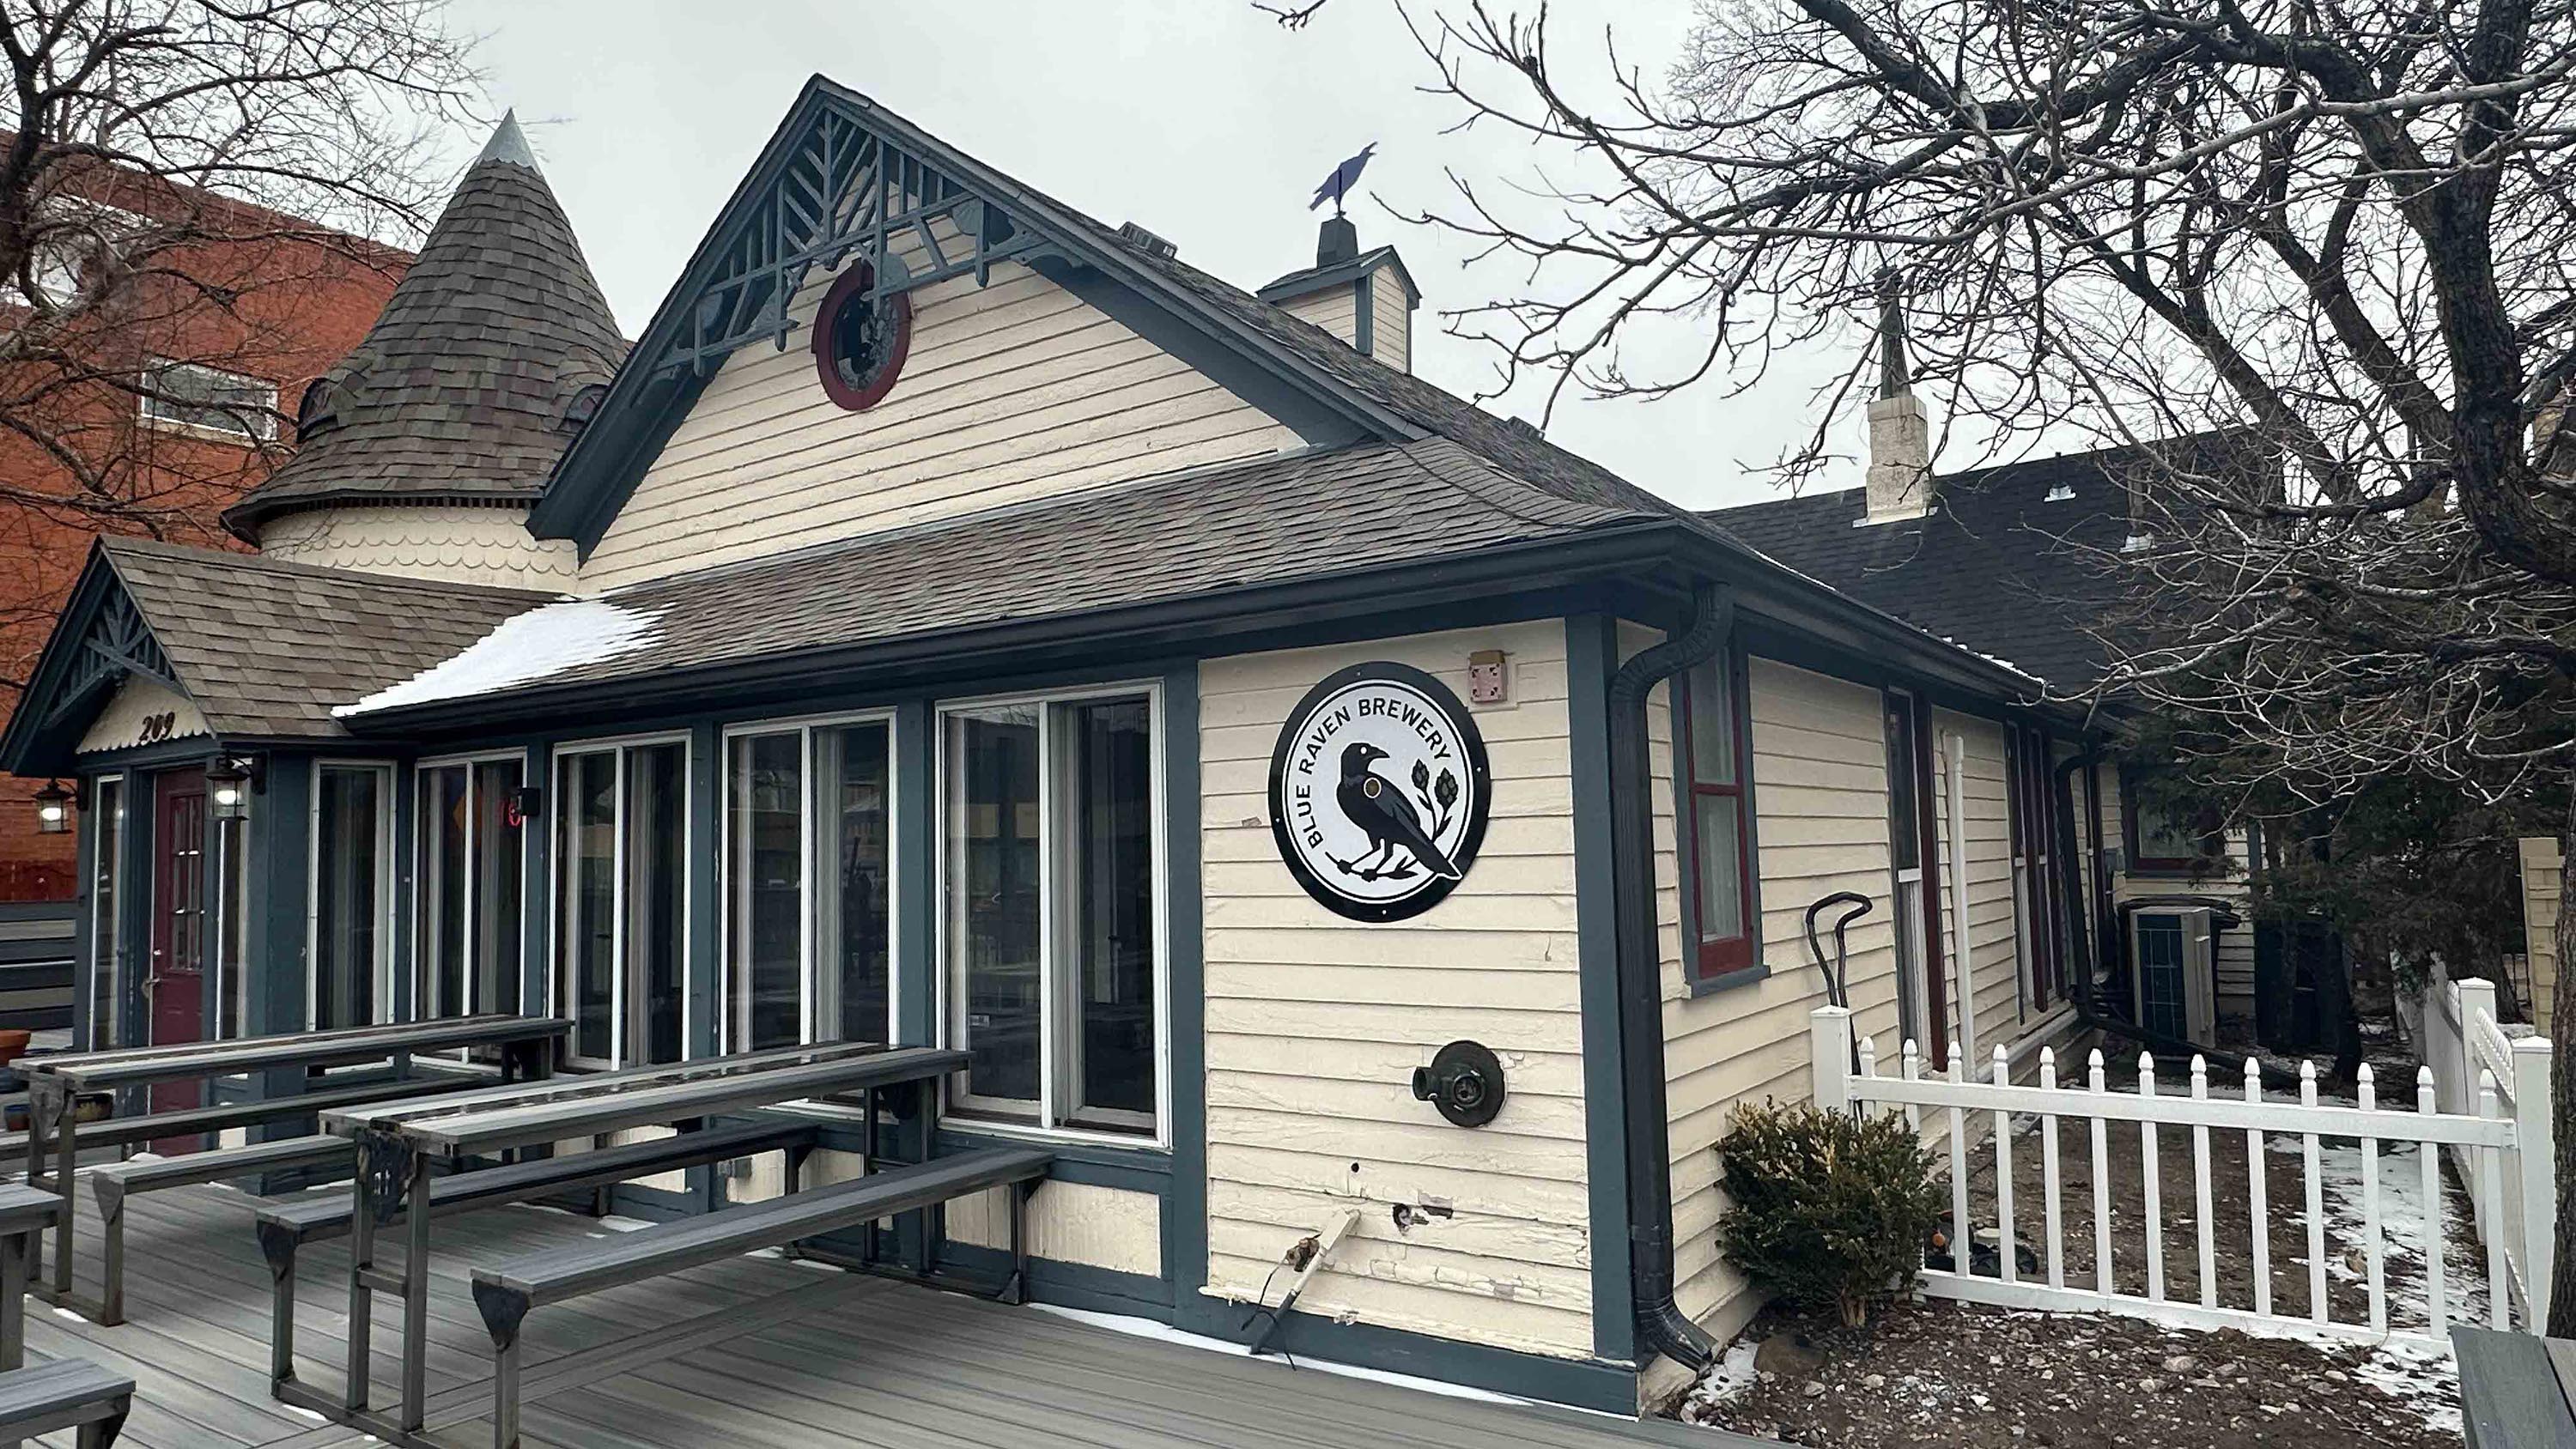 Blue Raven Brewery in the historic Corson House in downtown Cheyenne offers plentiful indoor and outdoor seating. It’s dog-friendly, too, with canine regulars remembering there are treats at the bar for them, too.Photo Credit: Amber Leberman